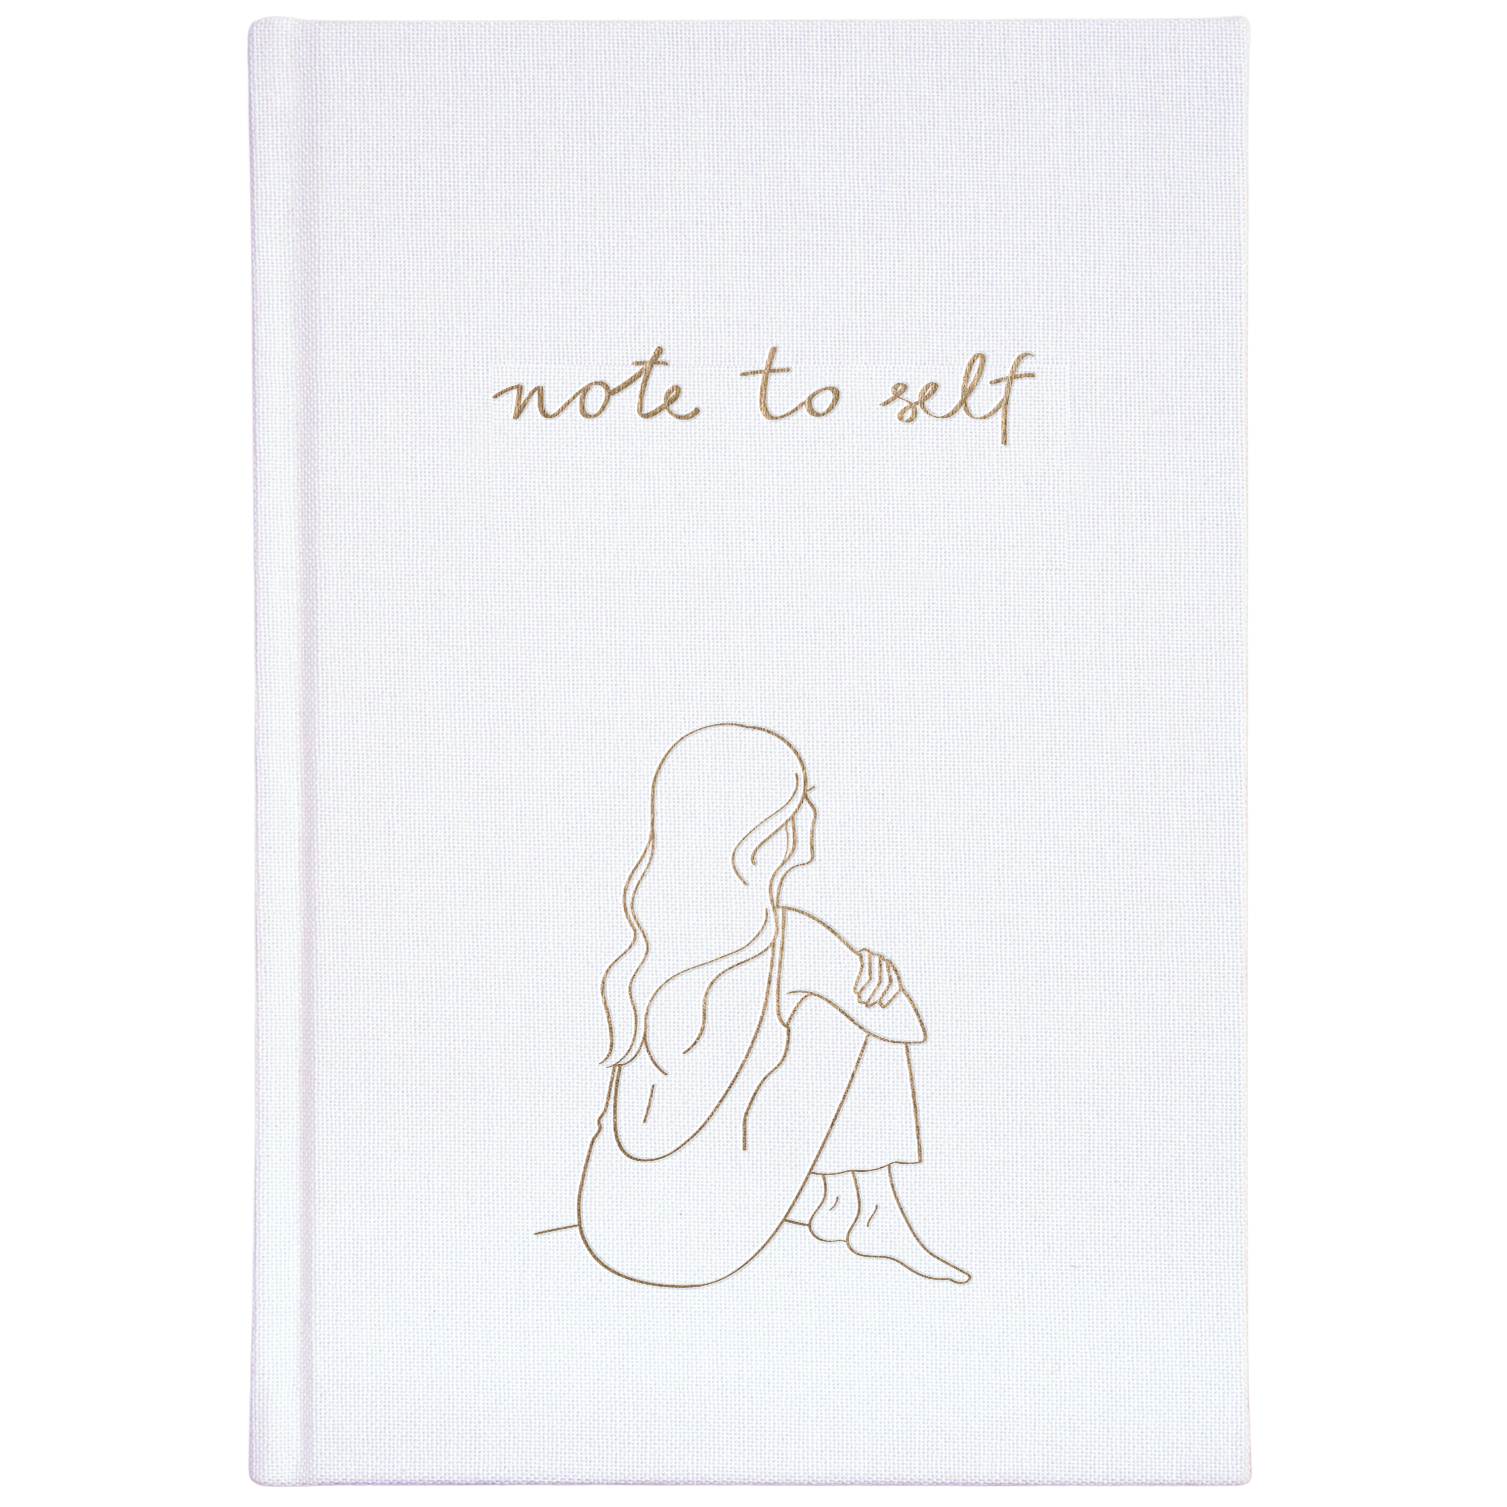 Forget Me Not Note to Self Gratitude Journal